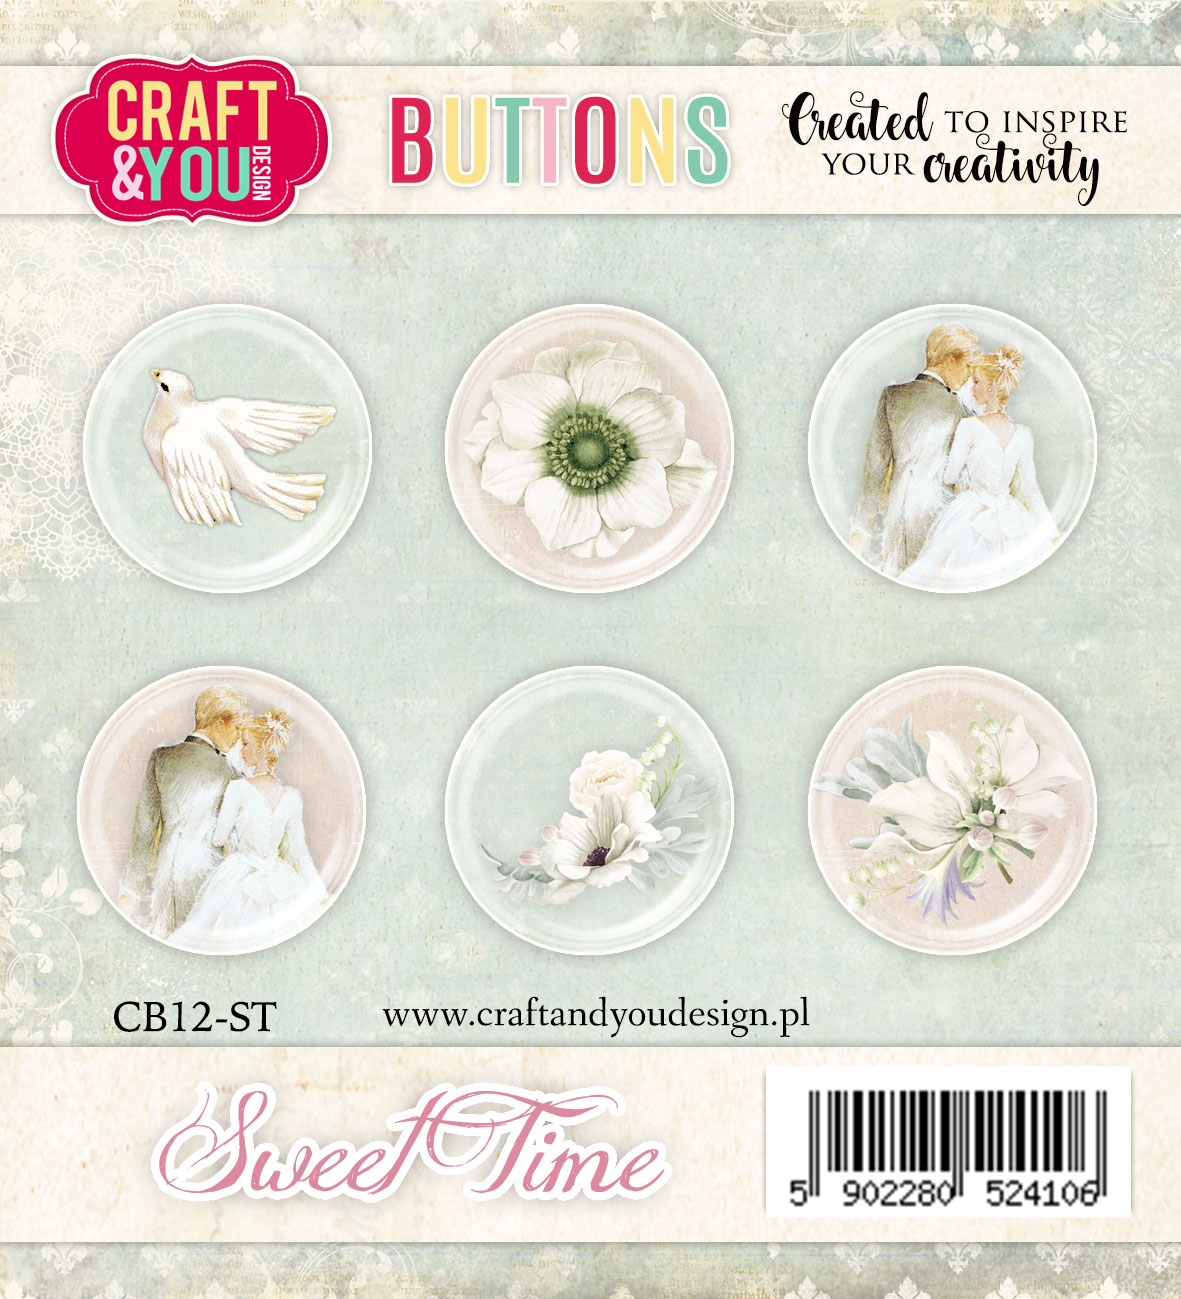  CB12-ST Buttons set - Sweet Time